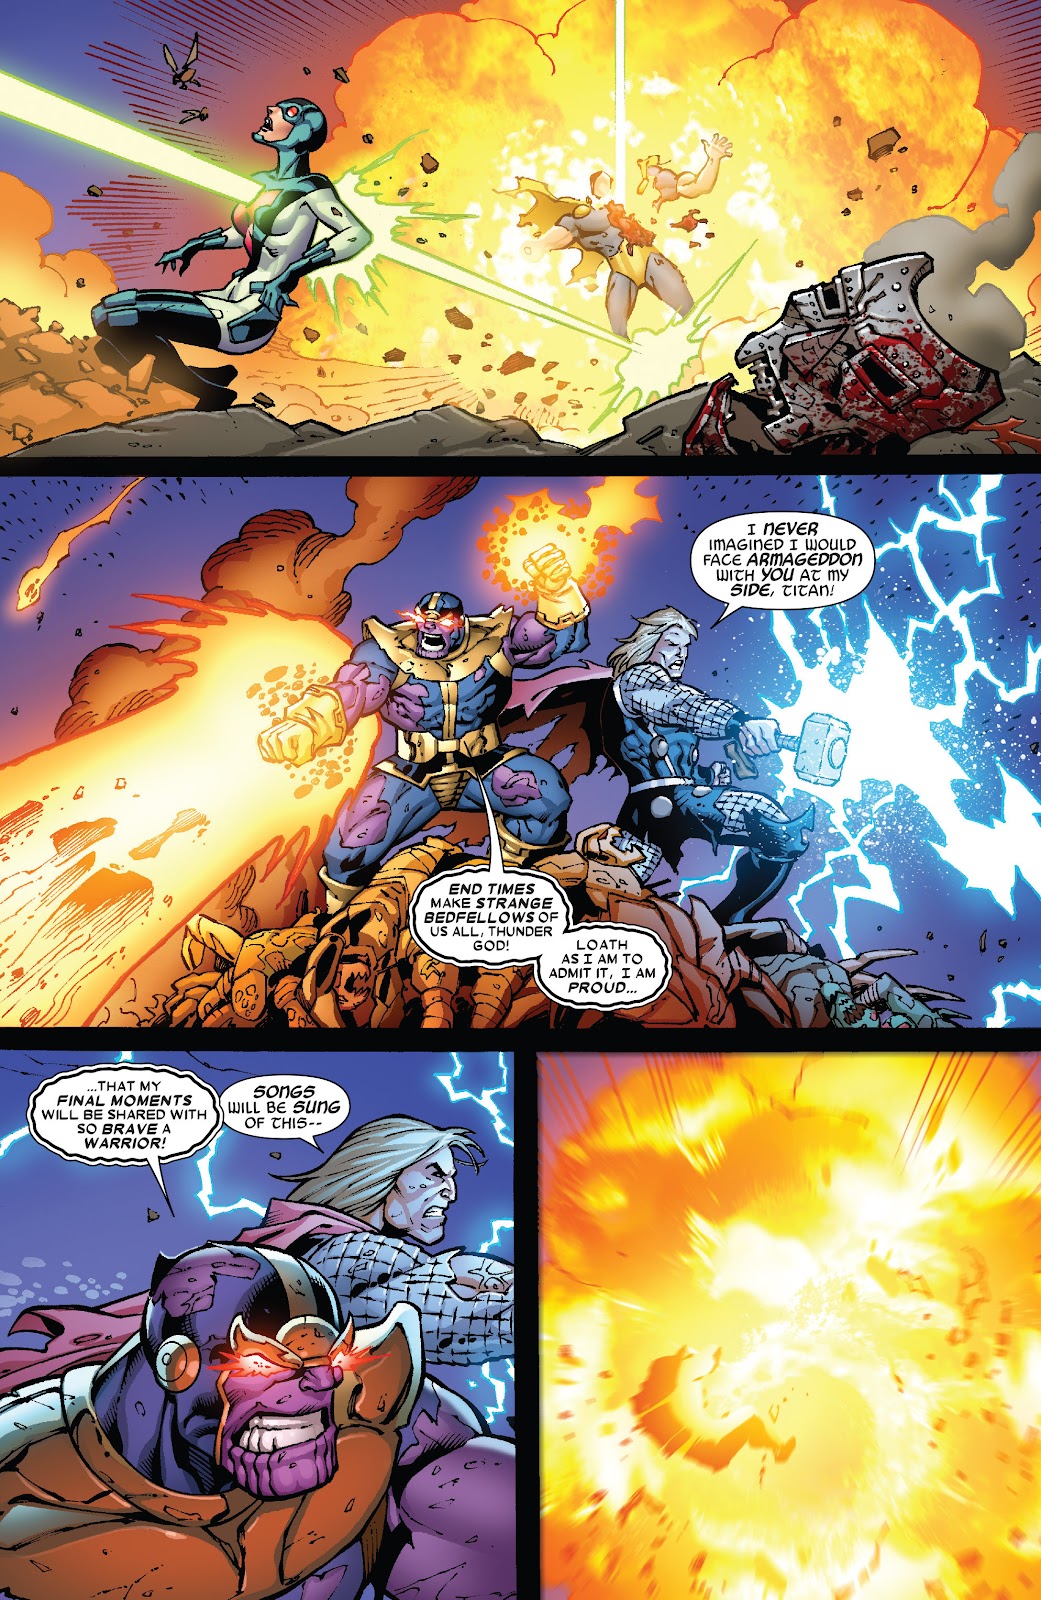 llevar a cabo juego Ruina Thanos The Infinity Finale Full | Read Thanos The Infinity Finale Full  comic online in high quality. Read Full Comic online for free - Read comics  online in high quality .|viewcomiconline.com